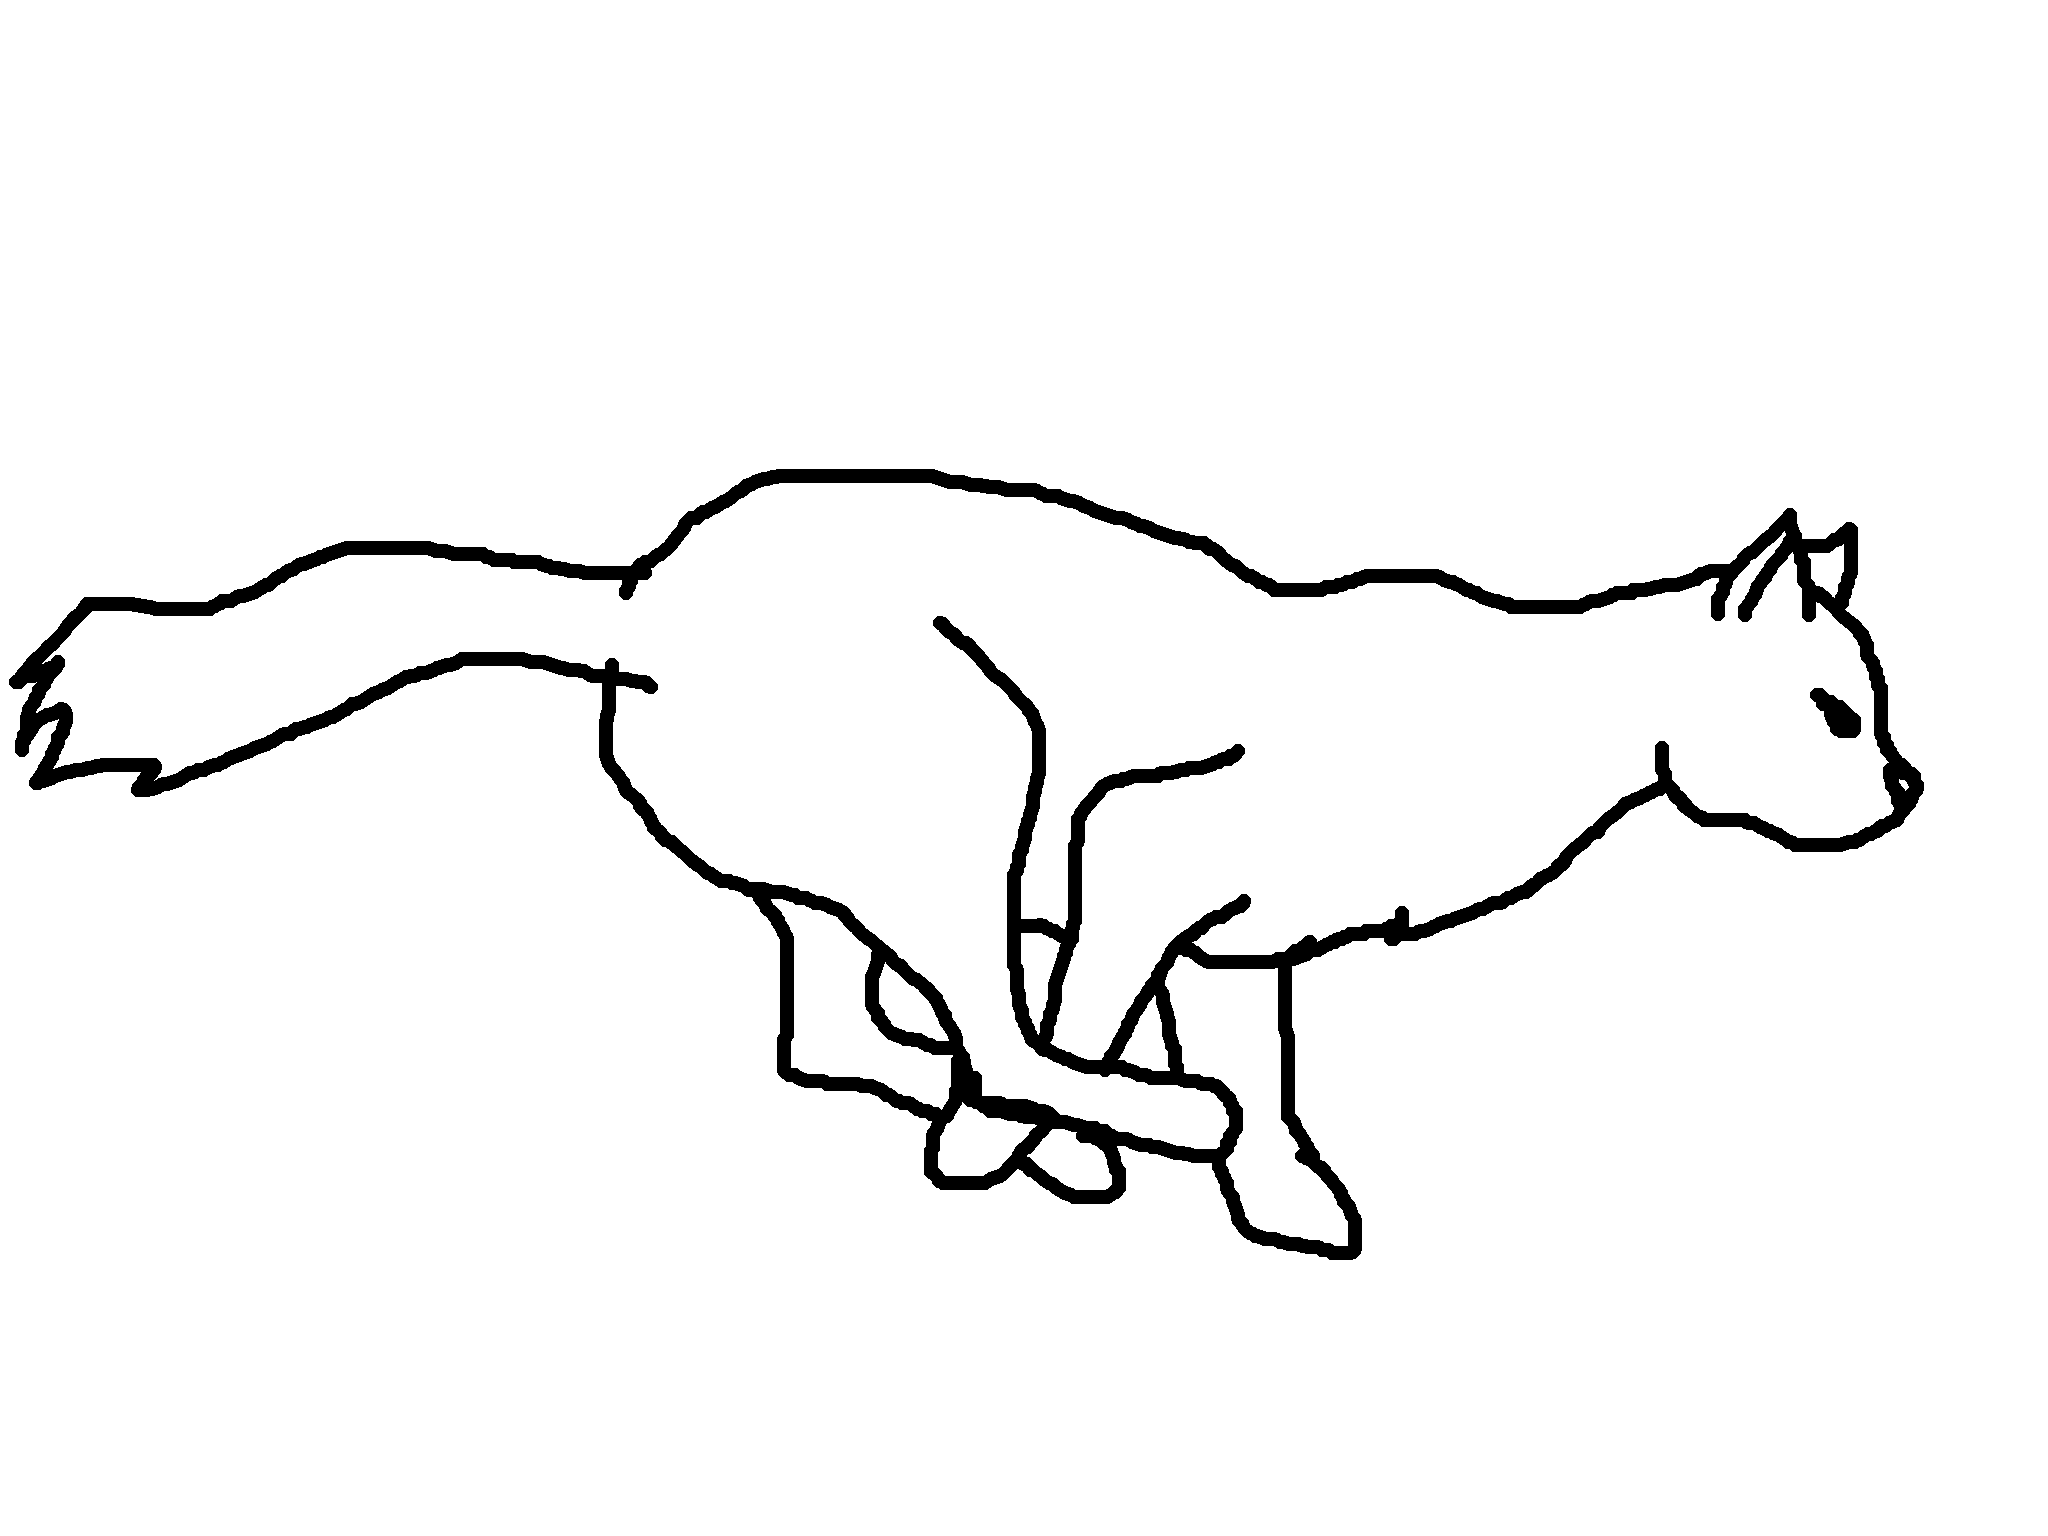 Realistic running cat lineart by Spottedheart22 on deviantART